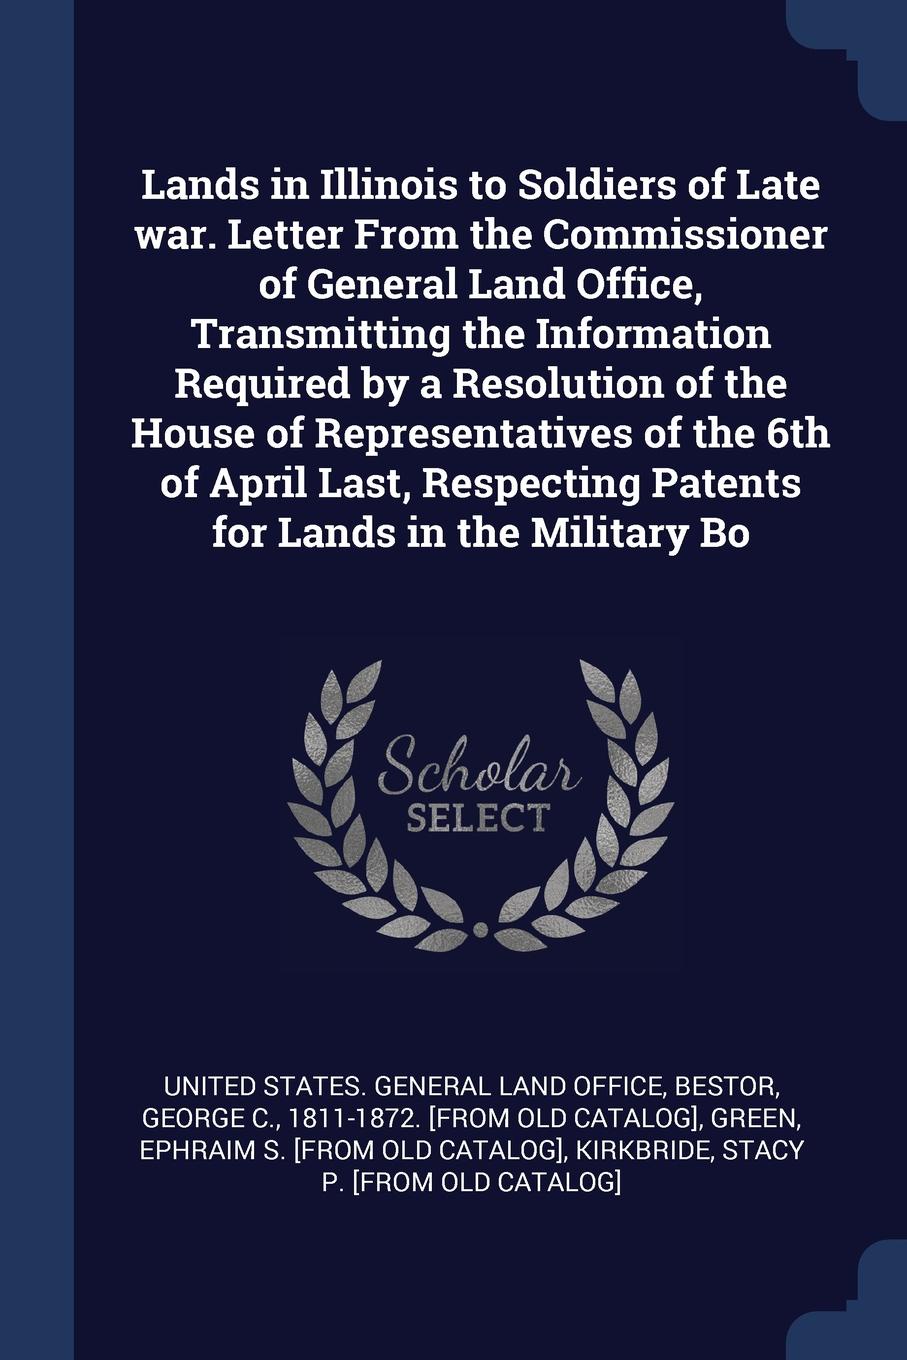 Lands in Illinois to Soldiers of Late war. Letter From the Commissioner of General Land Office, Transmitting the Information Required by a Resolution of the House of Representatives of the 6th of April Last, Respecting Patents for Lands in the Mil...